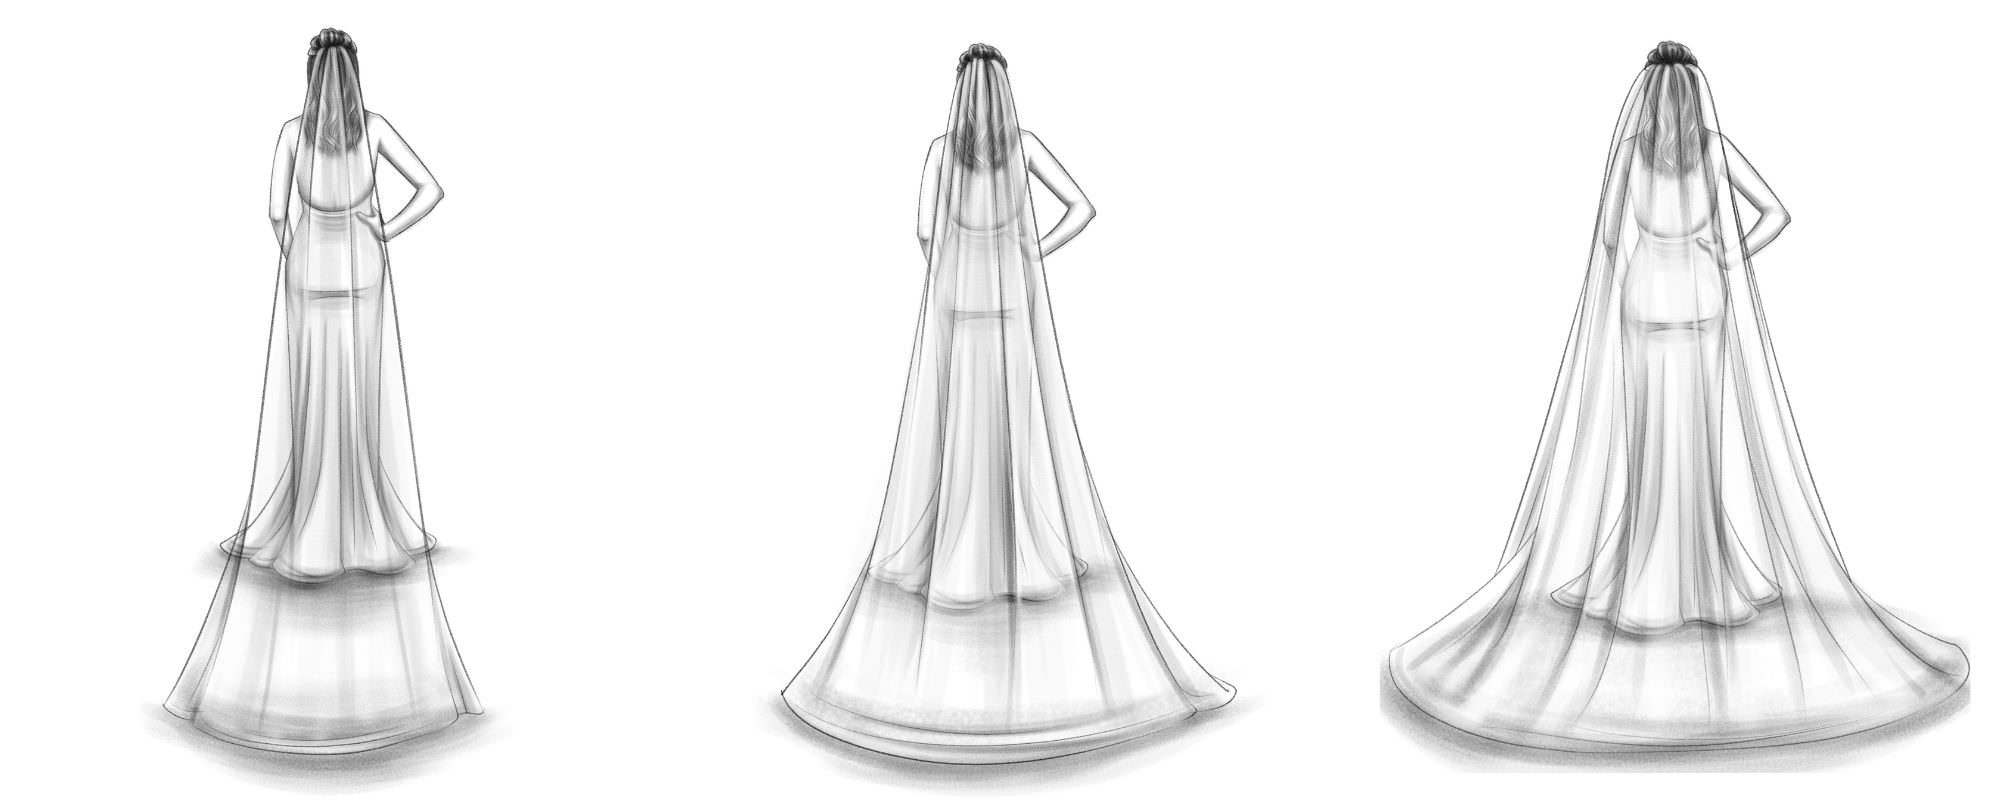 wedding sketch of brides in styles of veils made from mom's antique wedding dress